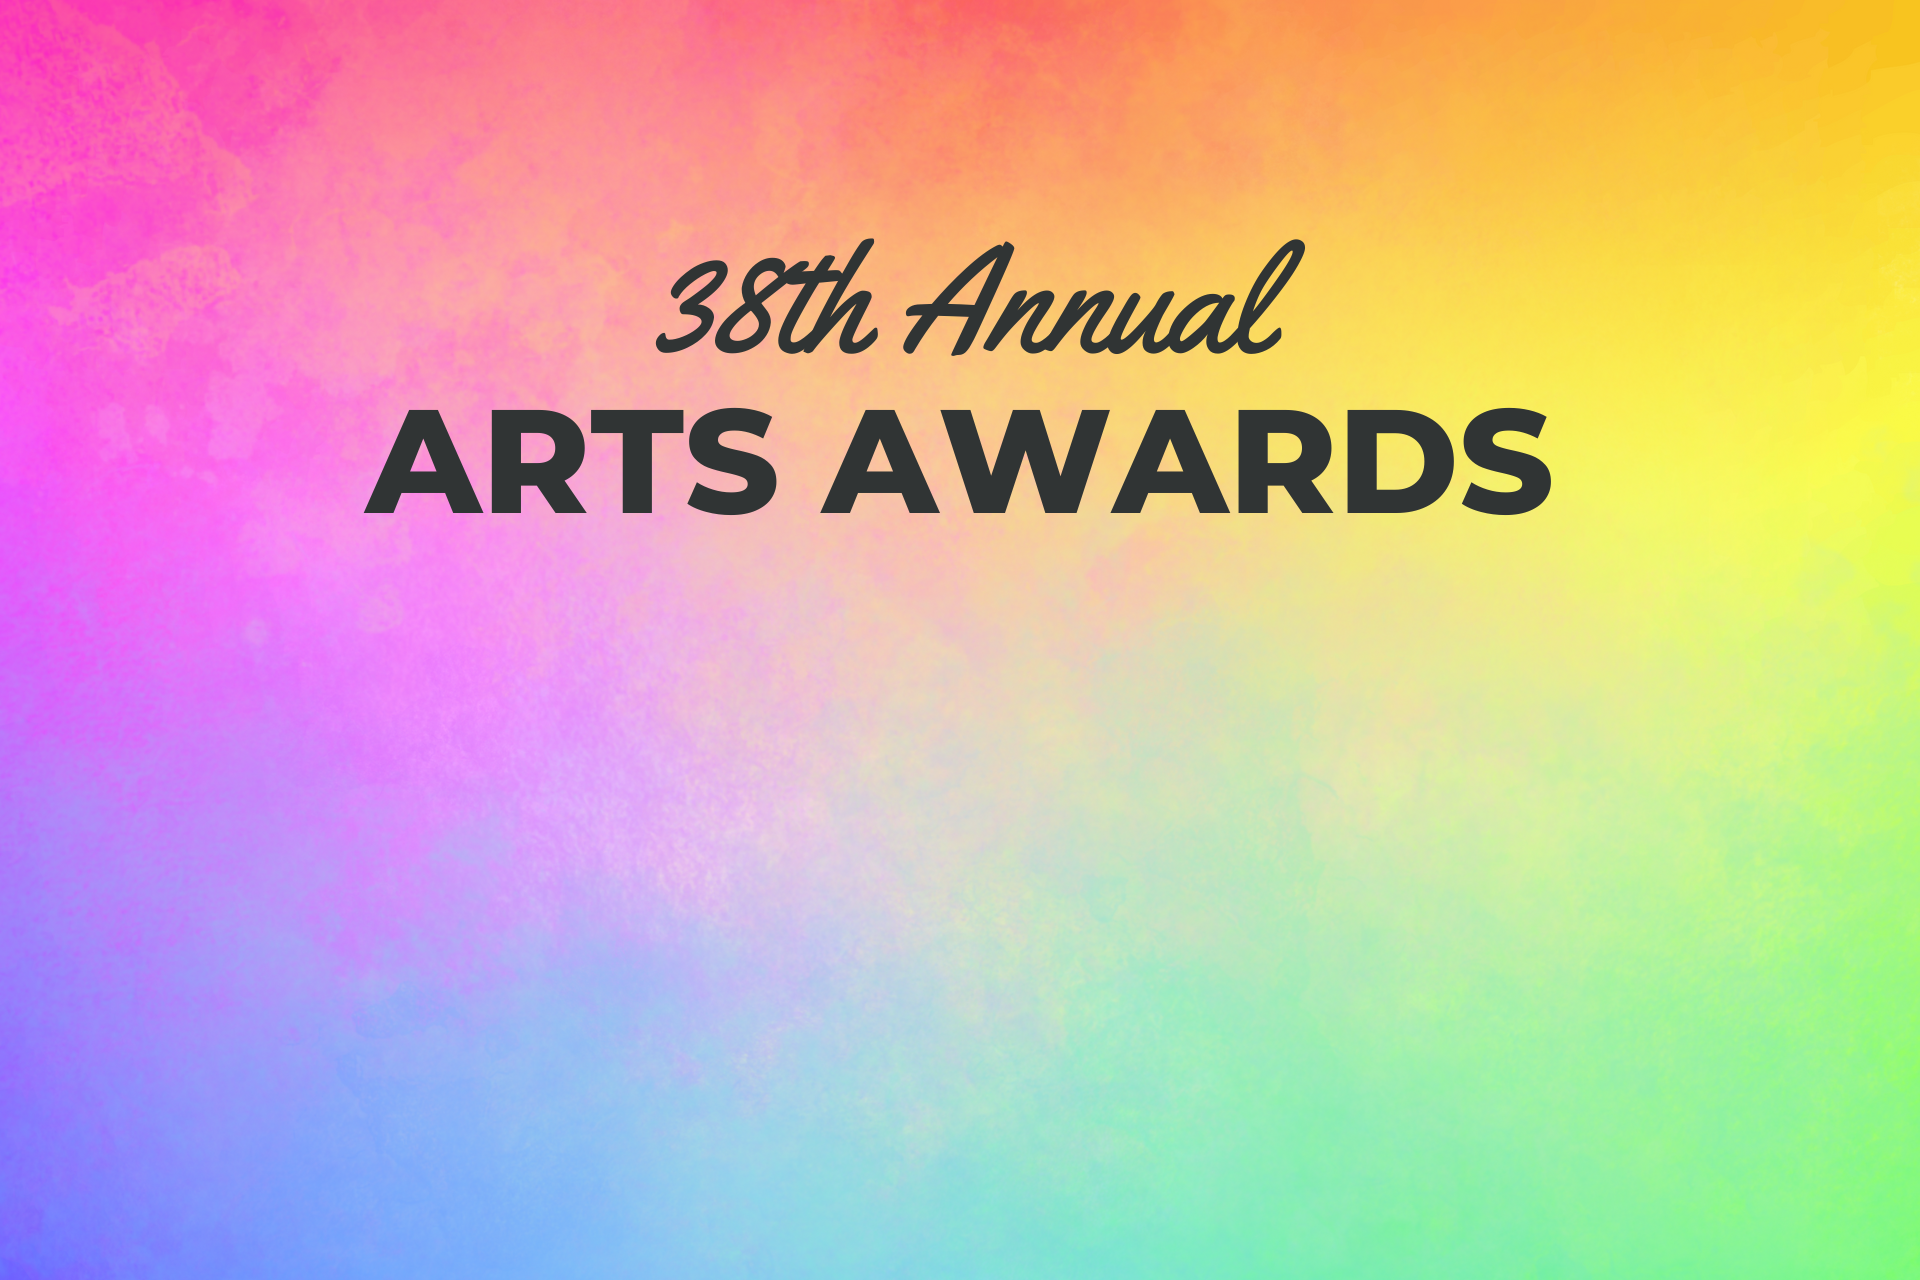 RELEASE: Long list announced for 38th Annual Arts Awards